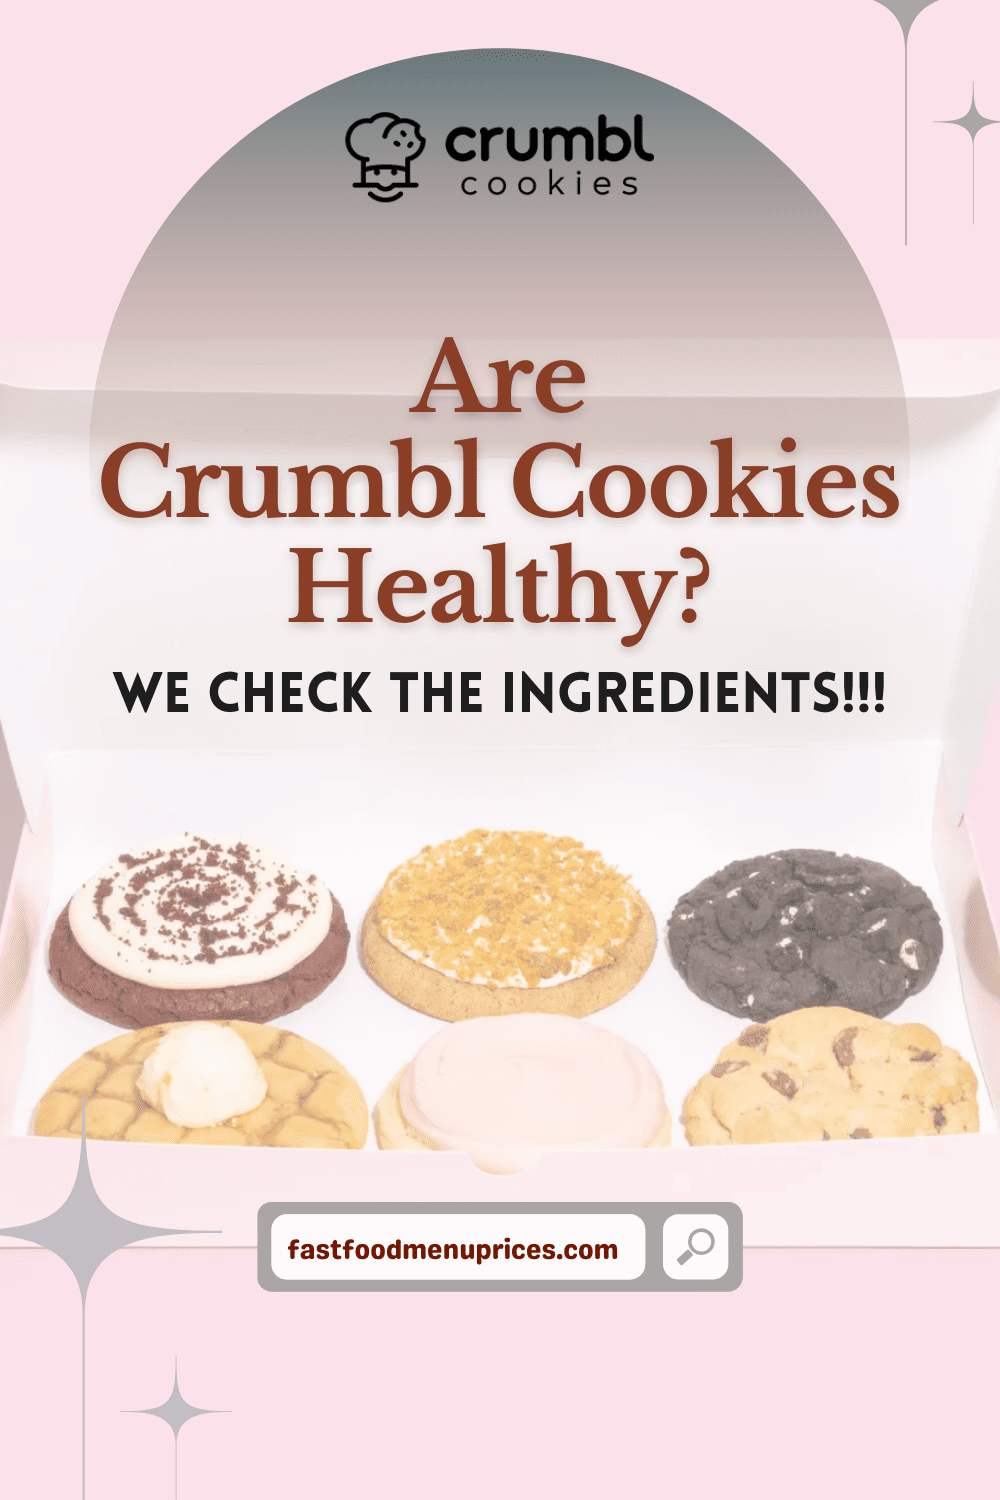 Crumb cookies healthy? check the ingredients and discover raising cane's secret menu options.